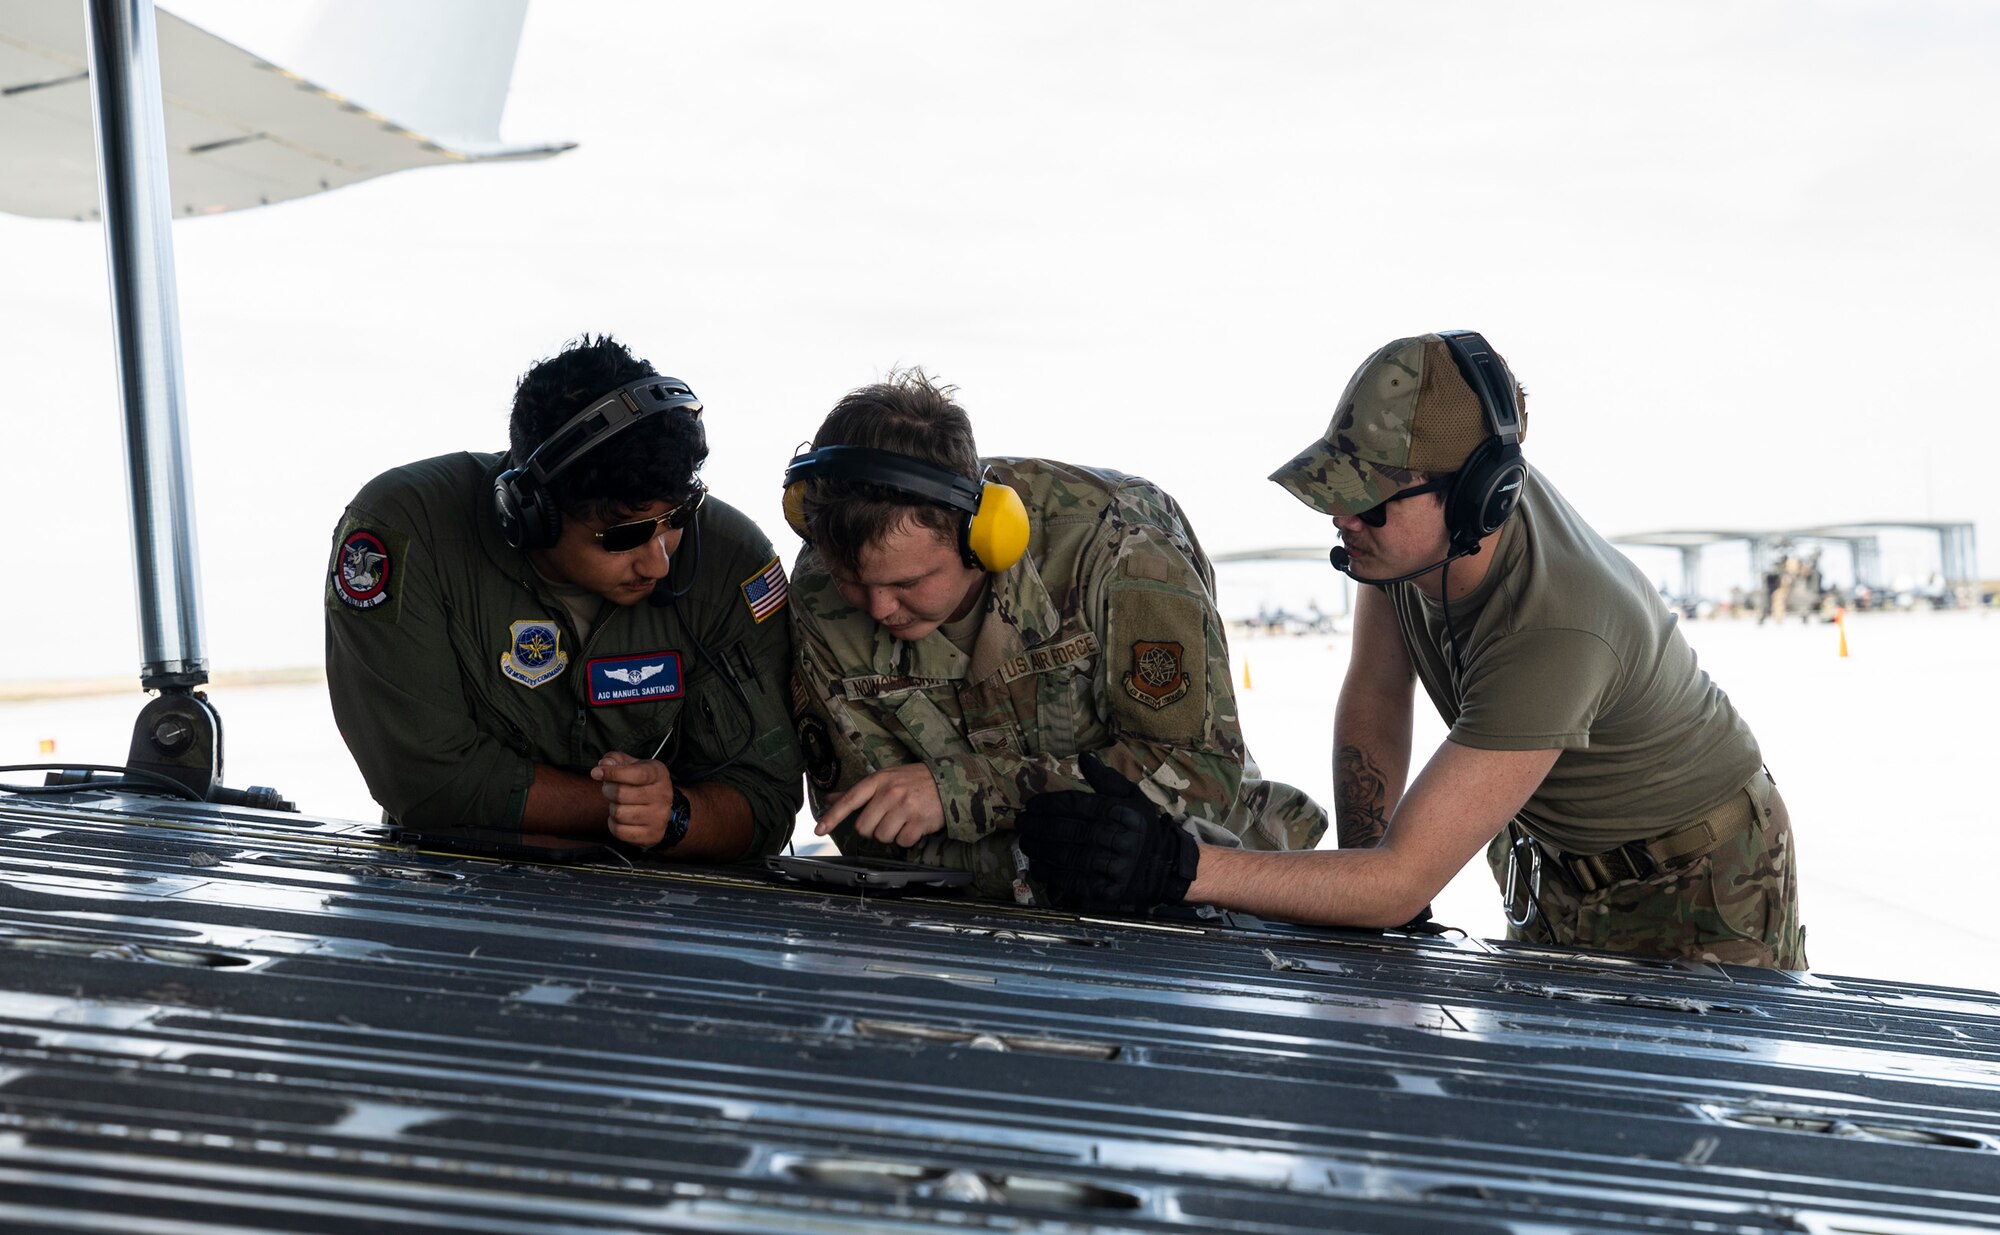 U.S. Air Force Airman 1st Class Manuel Santiago, left, a loadmaster with the 4th Airlift Squadron, Senior Airman Joseph Nowosielski, center, a fuels apprentice with the 627th Logistics Readiness Squadron, and Senior Airman Kainoa Cook, a loadmaster with the 4th AS, review a checklist while performing specialized fueling operations during Exercise Rainier War 23A at Mountain Home Air Force Base, Idaho, Sept. 25, 2023. Rainier War is an annual exercise led by the 62d Airlift Wing designed to evaluate the ability to generate, employ and sustain in-garrison and forward deployed forces. These exercises are necessary in assessing and maintaining wartime operational tempos, ensuring command and control across multiple locations. During the exercise, Airmen will respond to scenarios that replicate today’s contingency operations and will address full-spectrum readiness against modern threats brought on by peer adversaries. (U.S. Air Force photo by Staff Sgt. Rachel Williams)